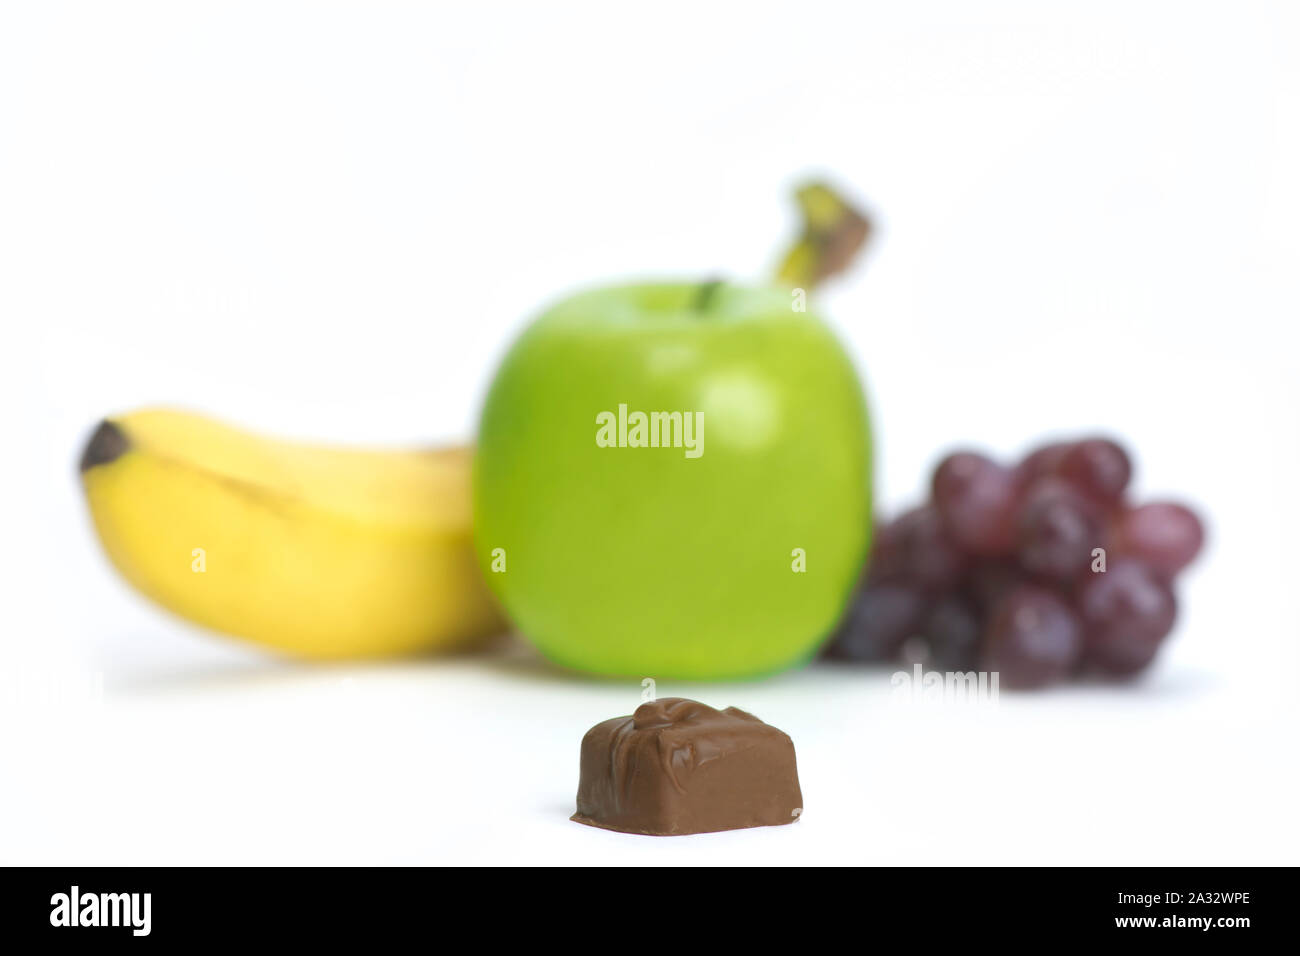 Food choice concept photo featuring chocolate vs fruit. Stock Photo